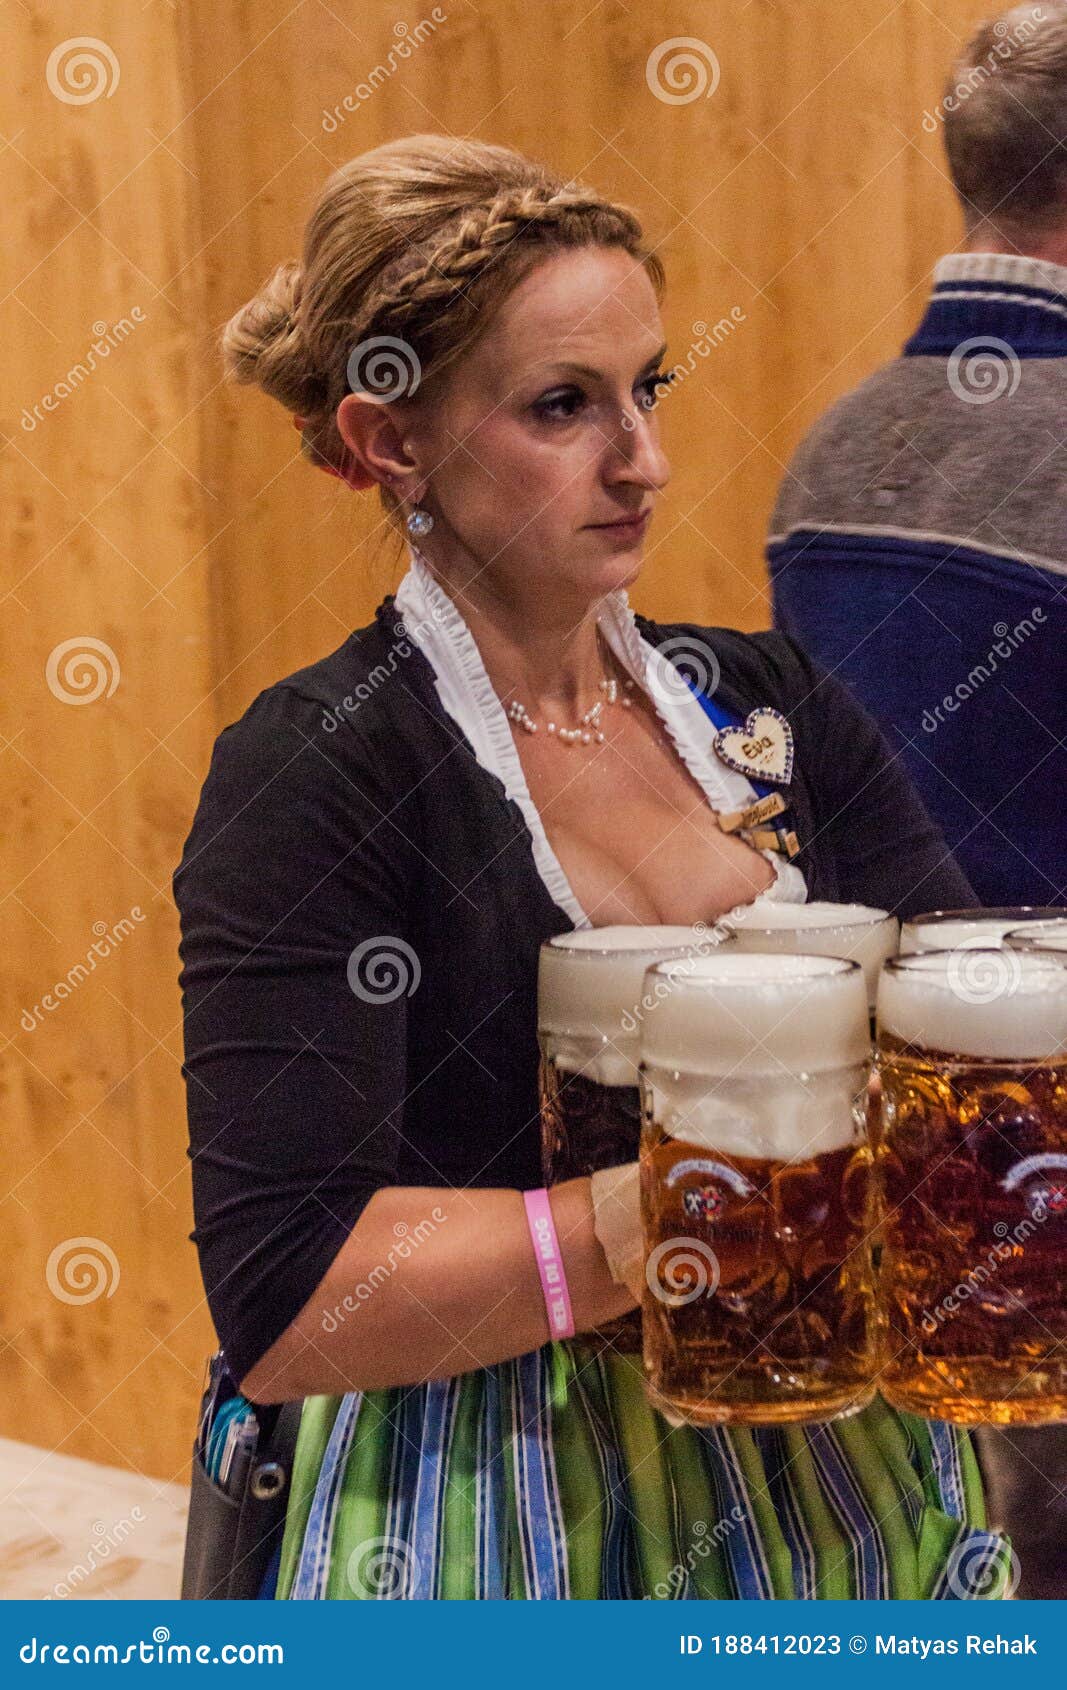 MUNICH, GERMANY - SEPTEMBER 17, 2016: Waitress Carrying Many Beer ...